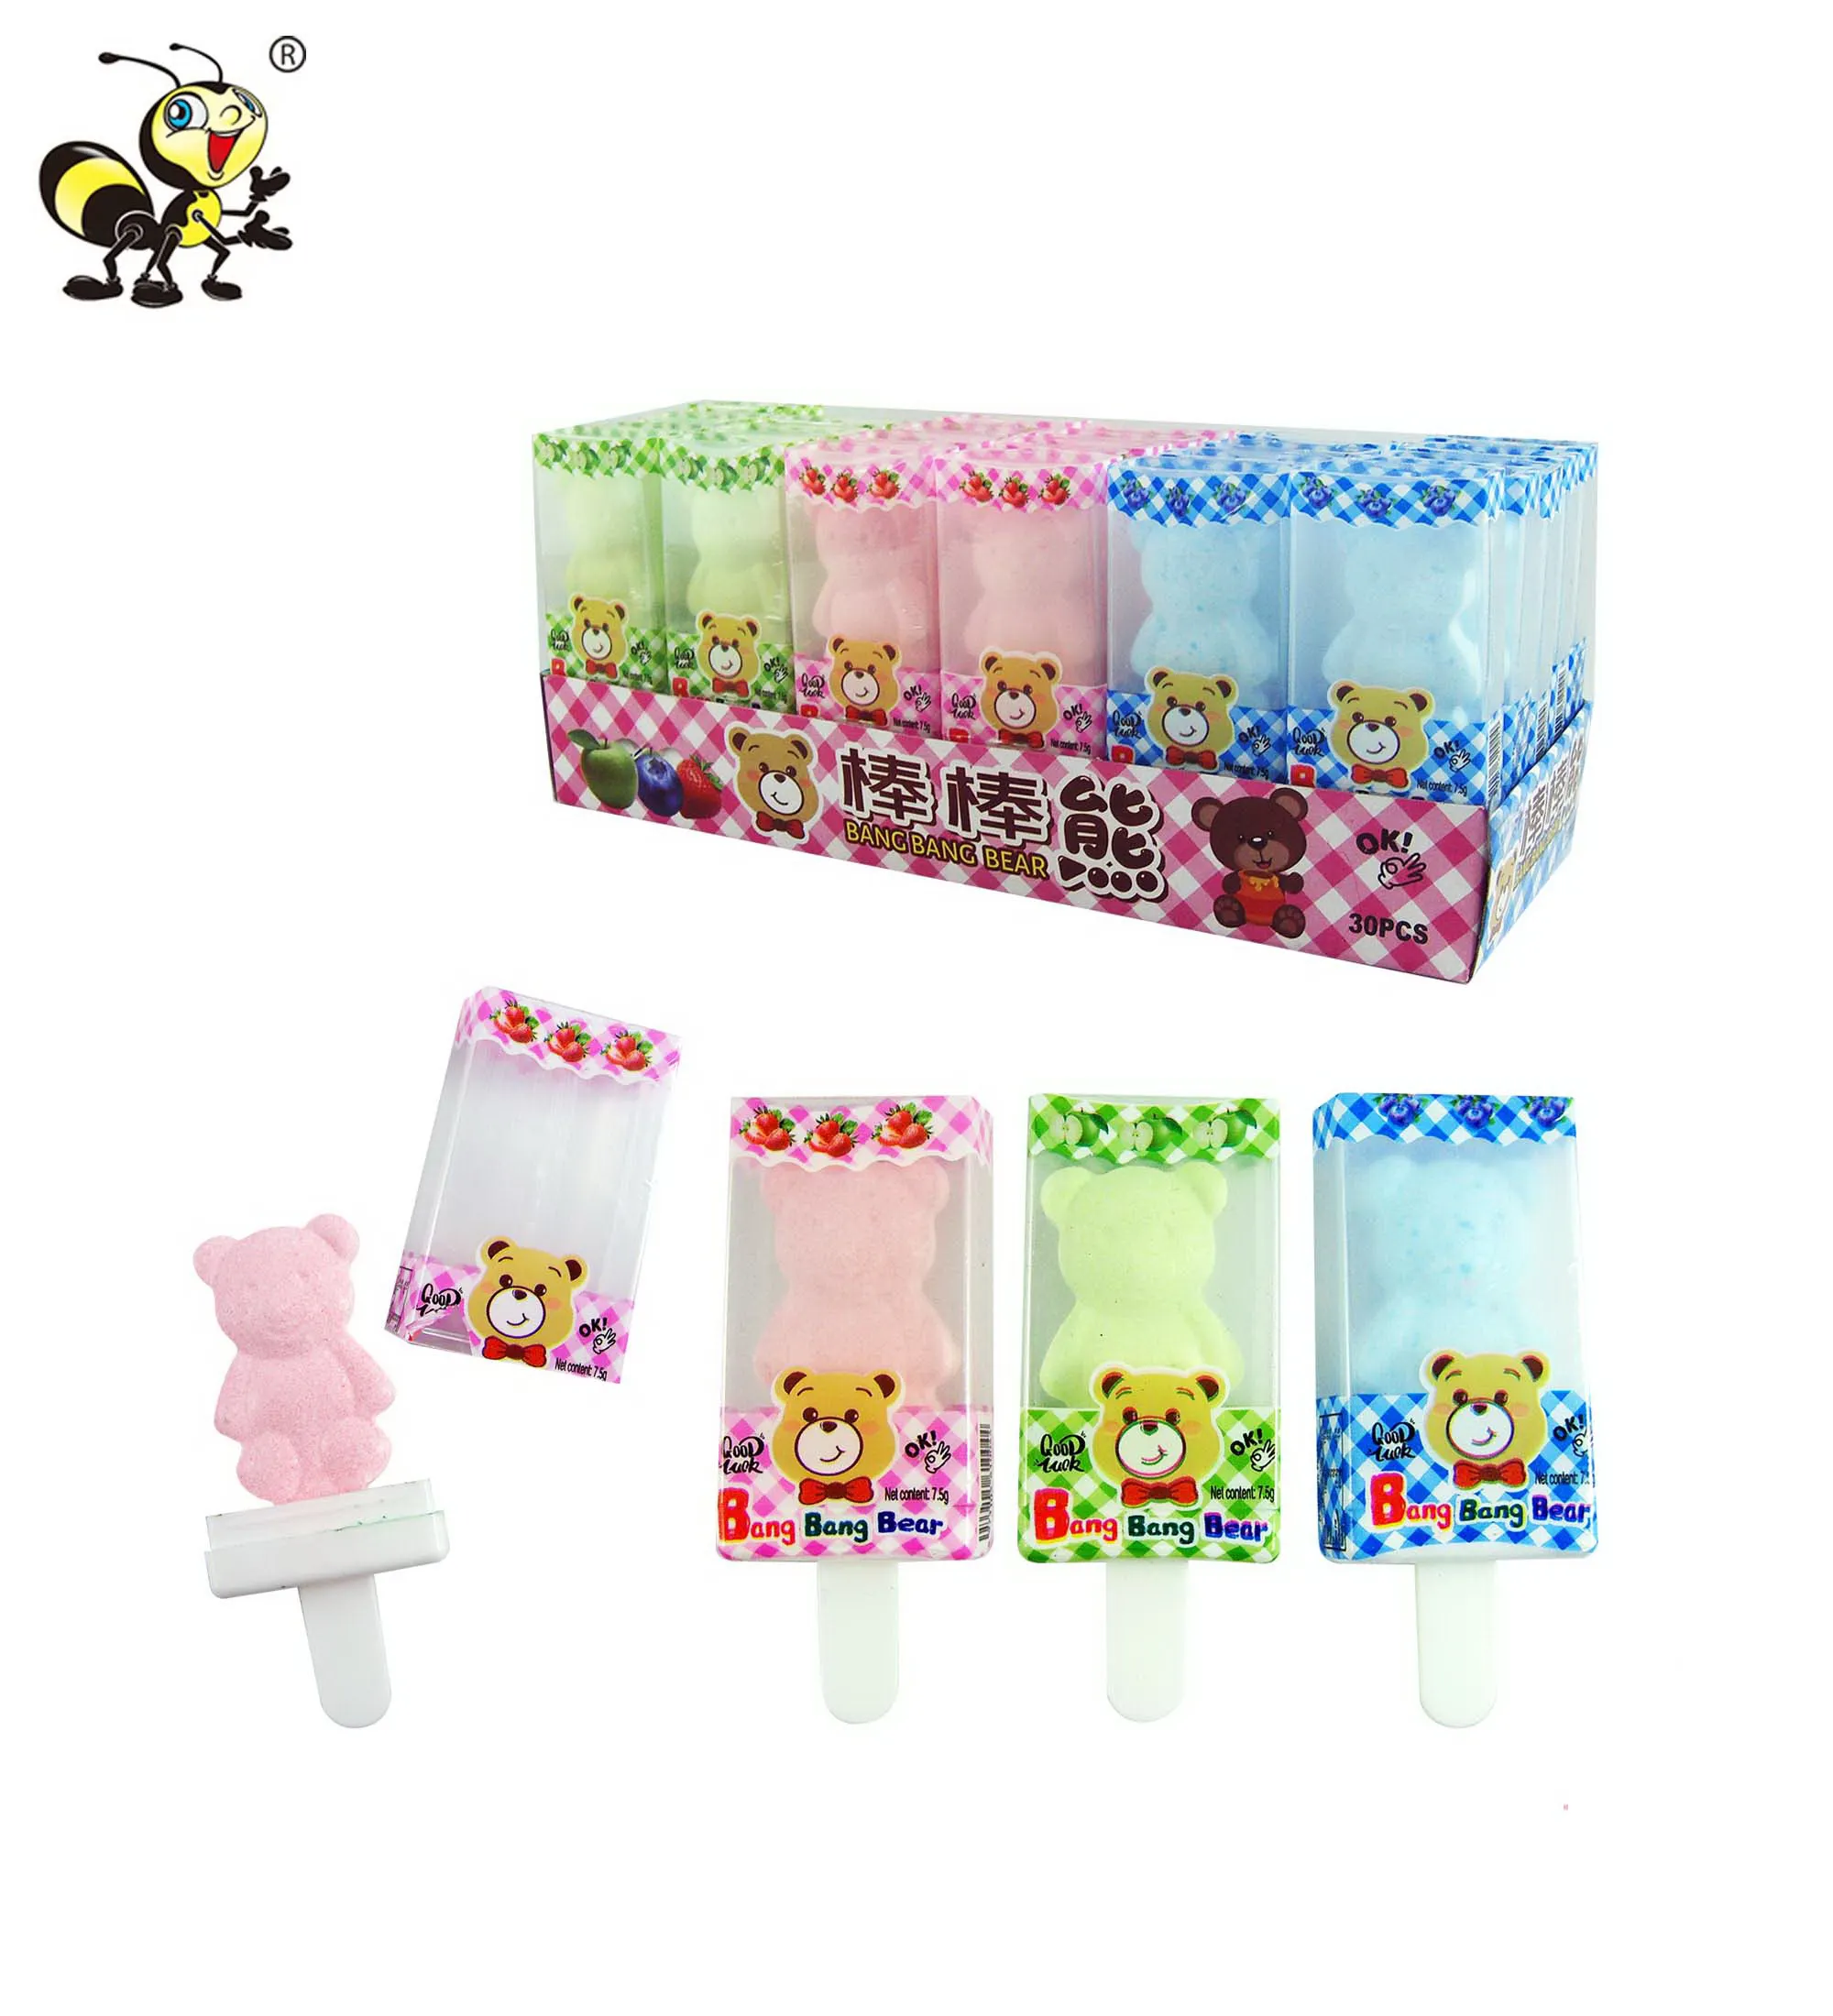 OEM push pop candy hall stick unico orsetto gommoso caramelle e dolci bar caramelle dure acide